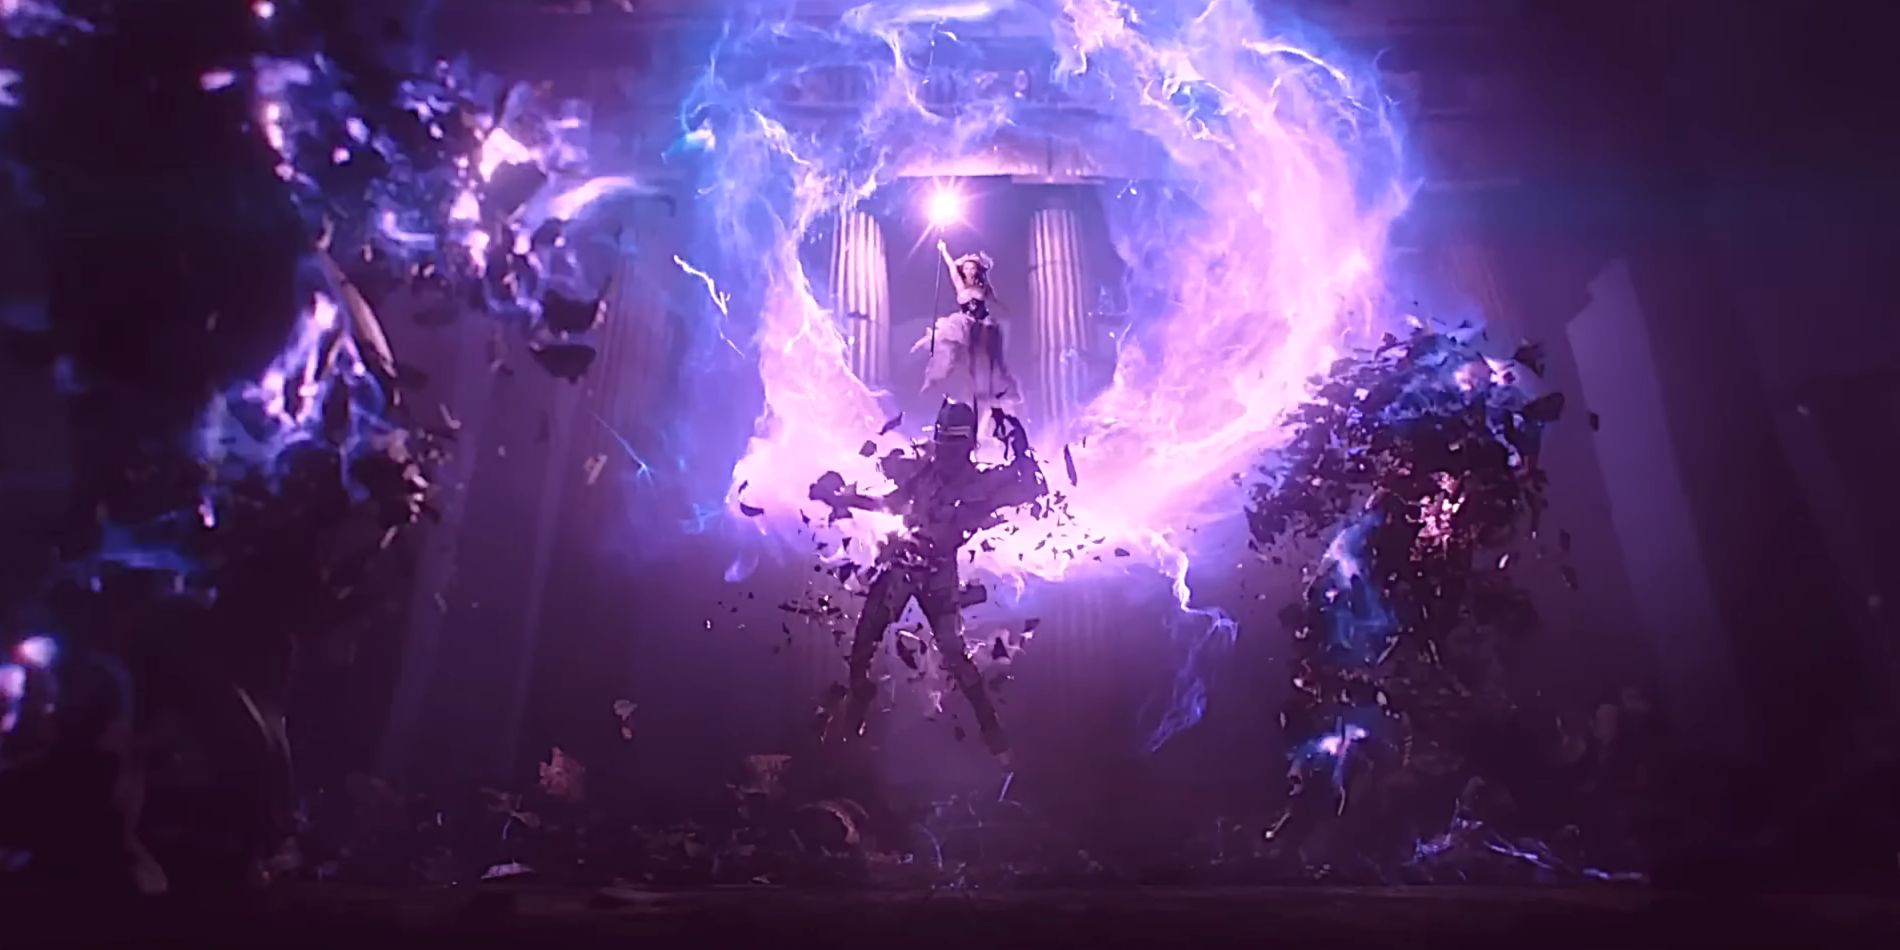 Screenshot from Knights of the Zodiac trailer shows the goddess of war destroying three metal suits of armor with a bright purple and blue energy while floating in the air.